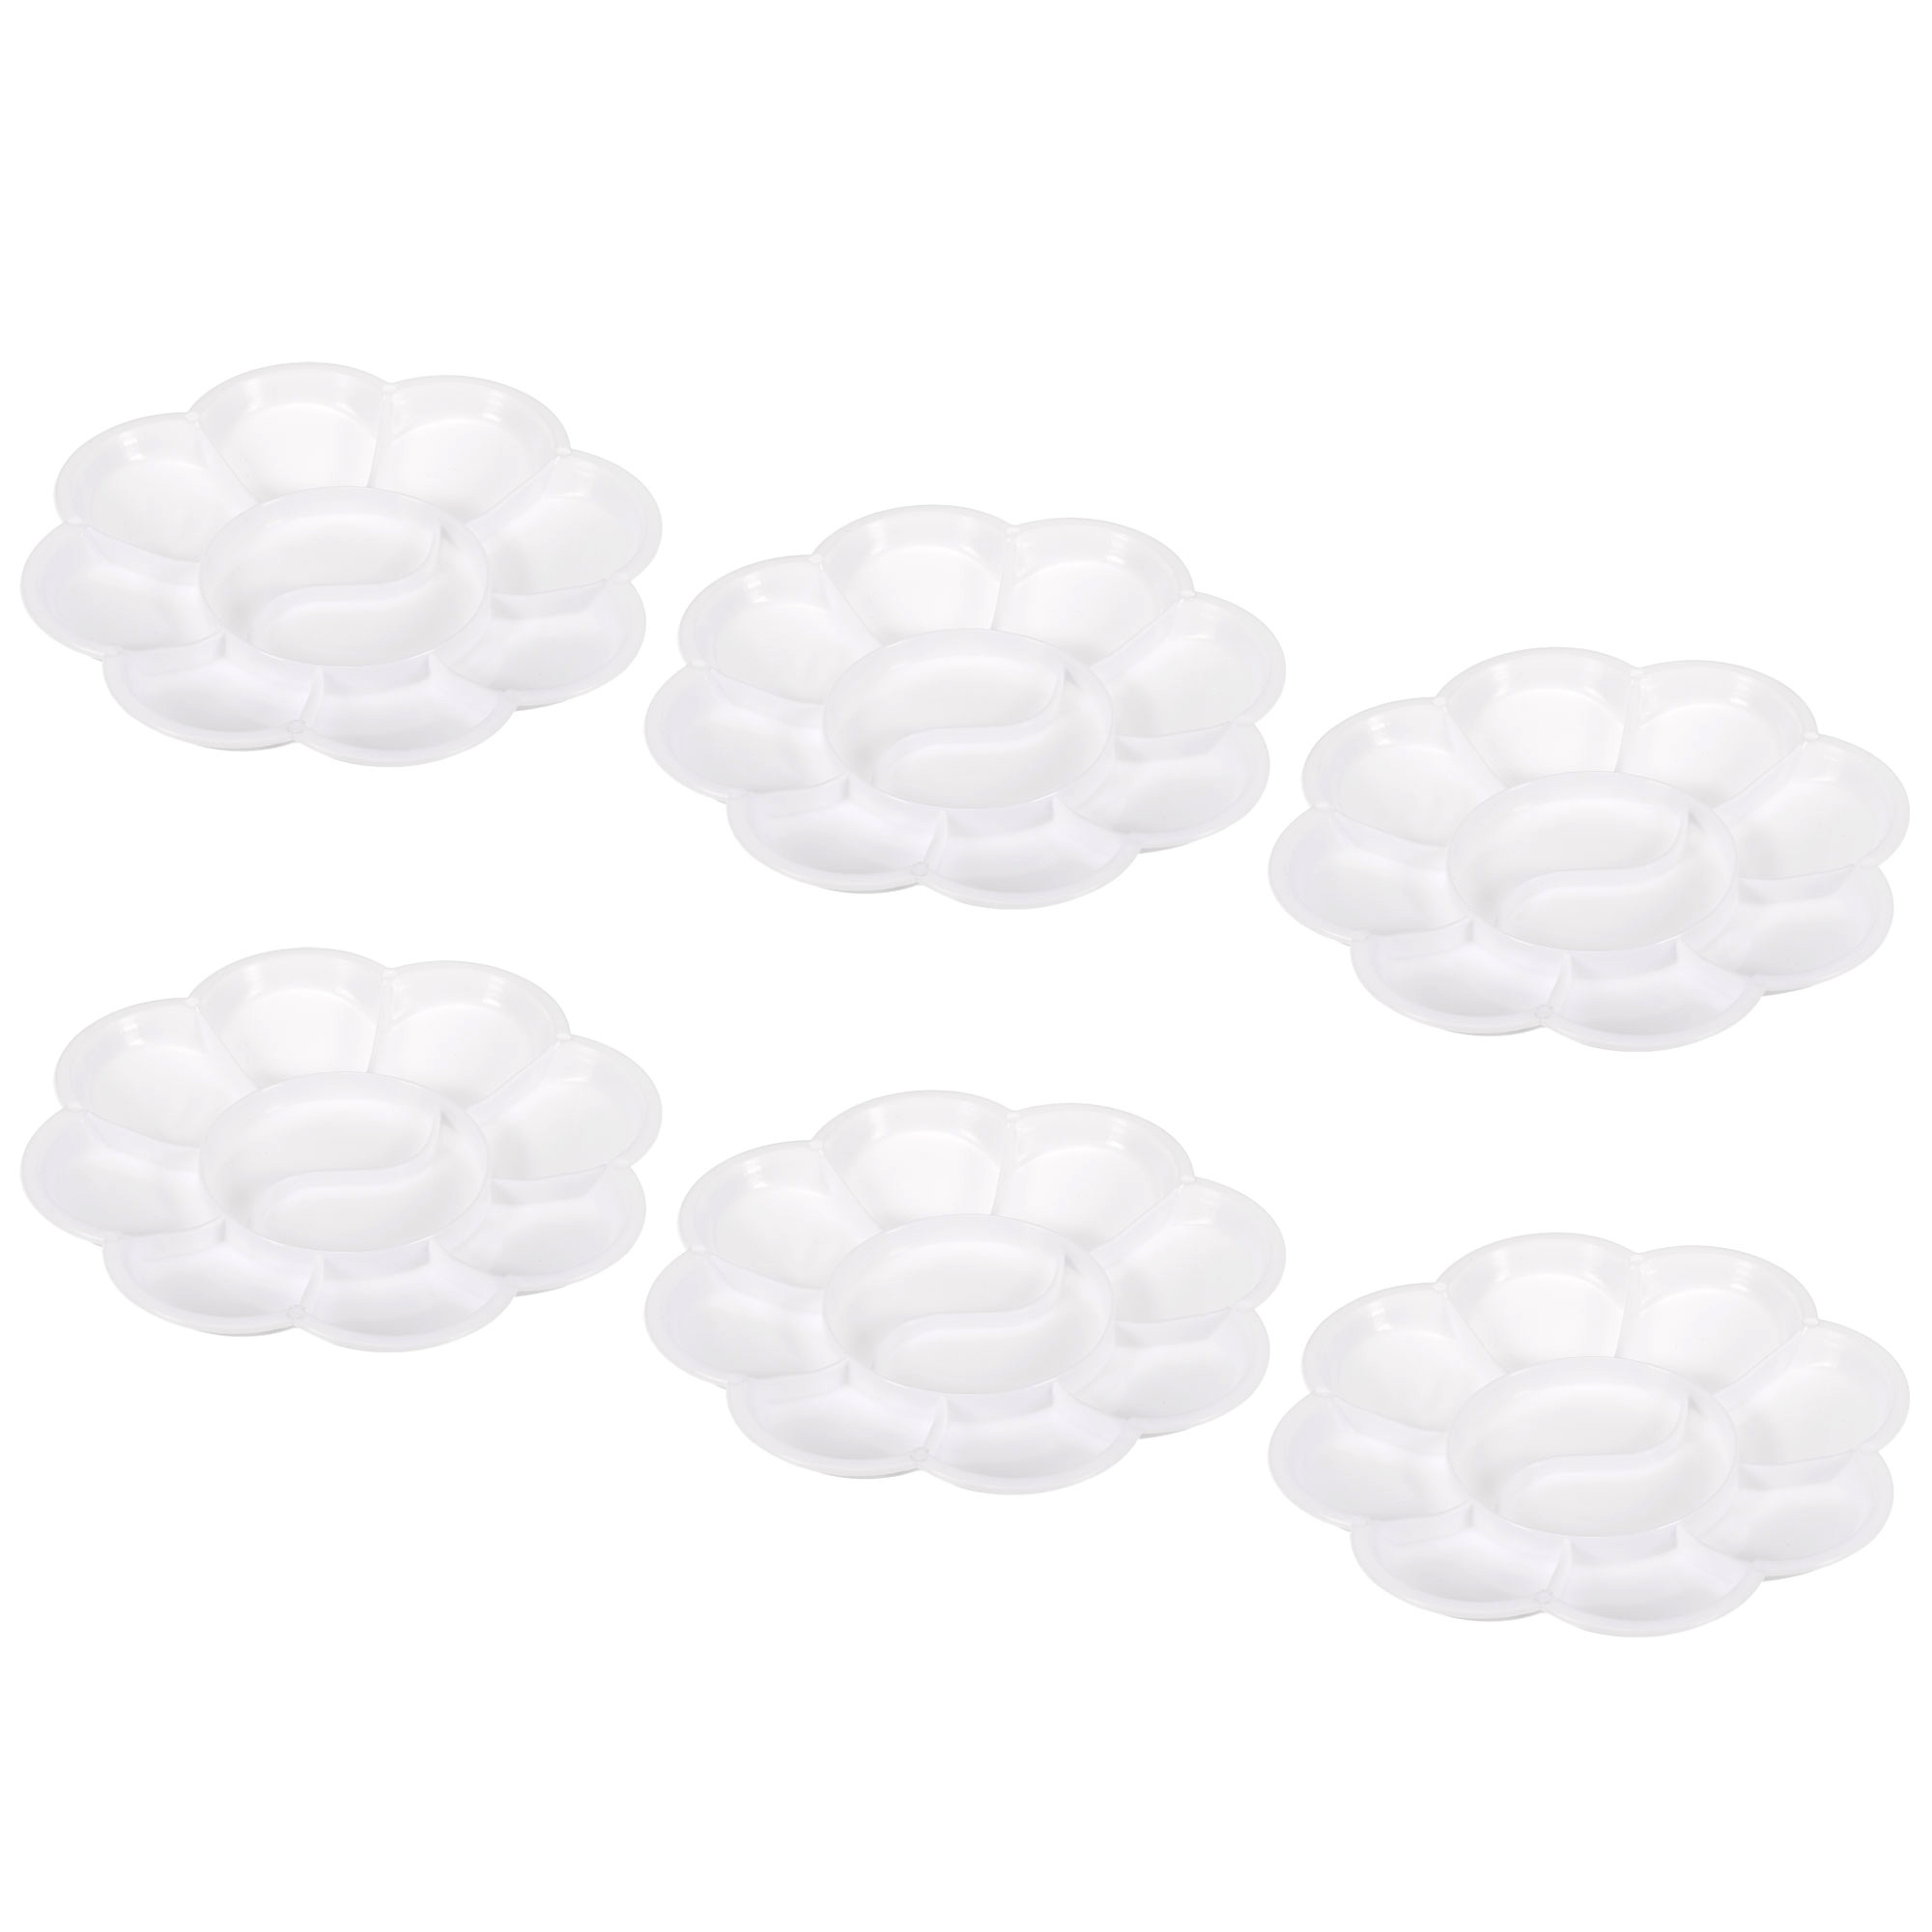 Uxcell 10 Wells 3.3 Paint Tray Palette Painting Pallet Holder Flower Shape  for Art and Craft, White 12 Pack